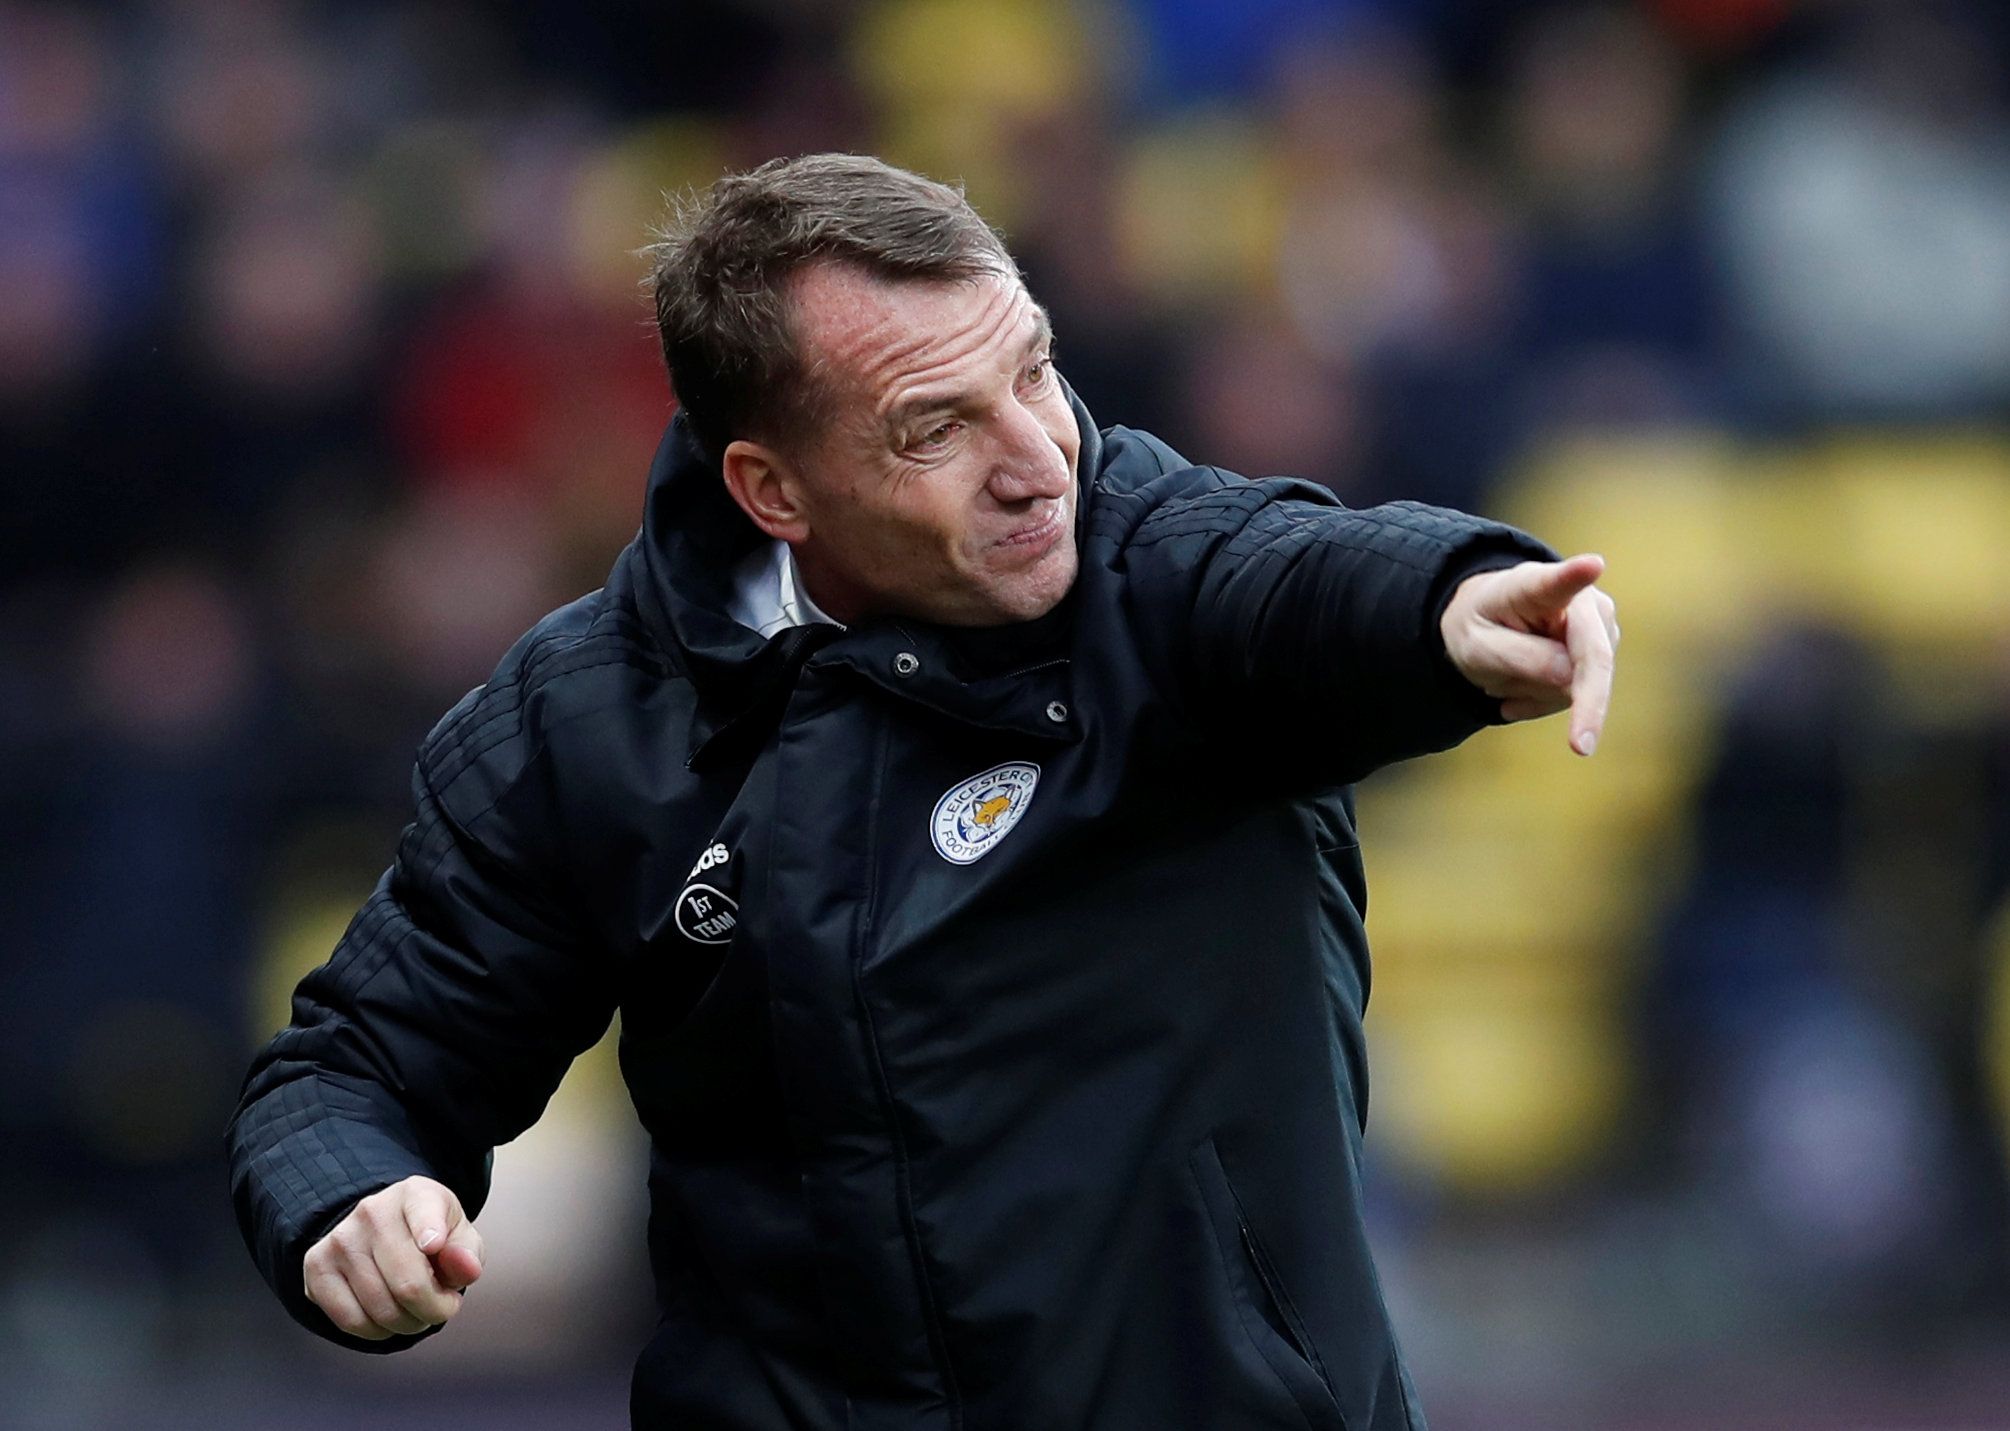 Soccer Football - Premier League - Watford v Leicester City - Vicarage Road, Watford, Britain - March 3, 2019  Leicester City manager Brendan Rodgers      REUTERS/David Klein  EDITORIAL USE ONLY. No use with unauthorized audio, video, data, fixture lists, club/league logos or 